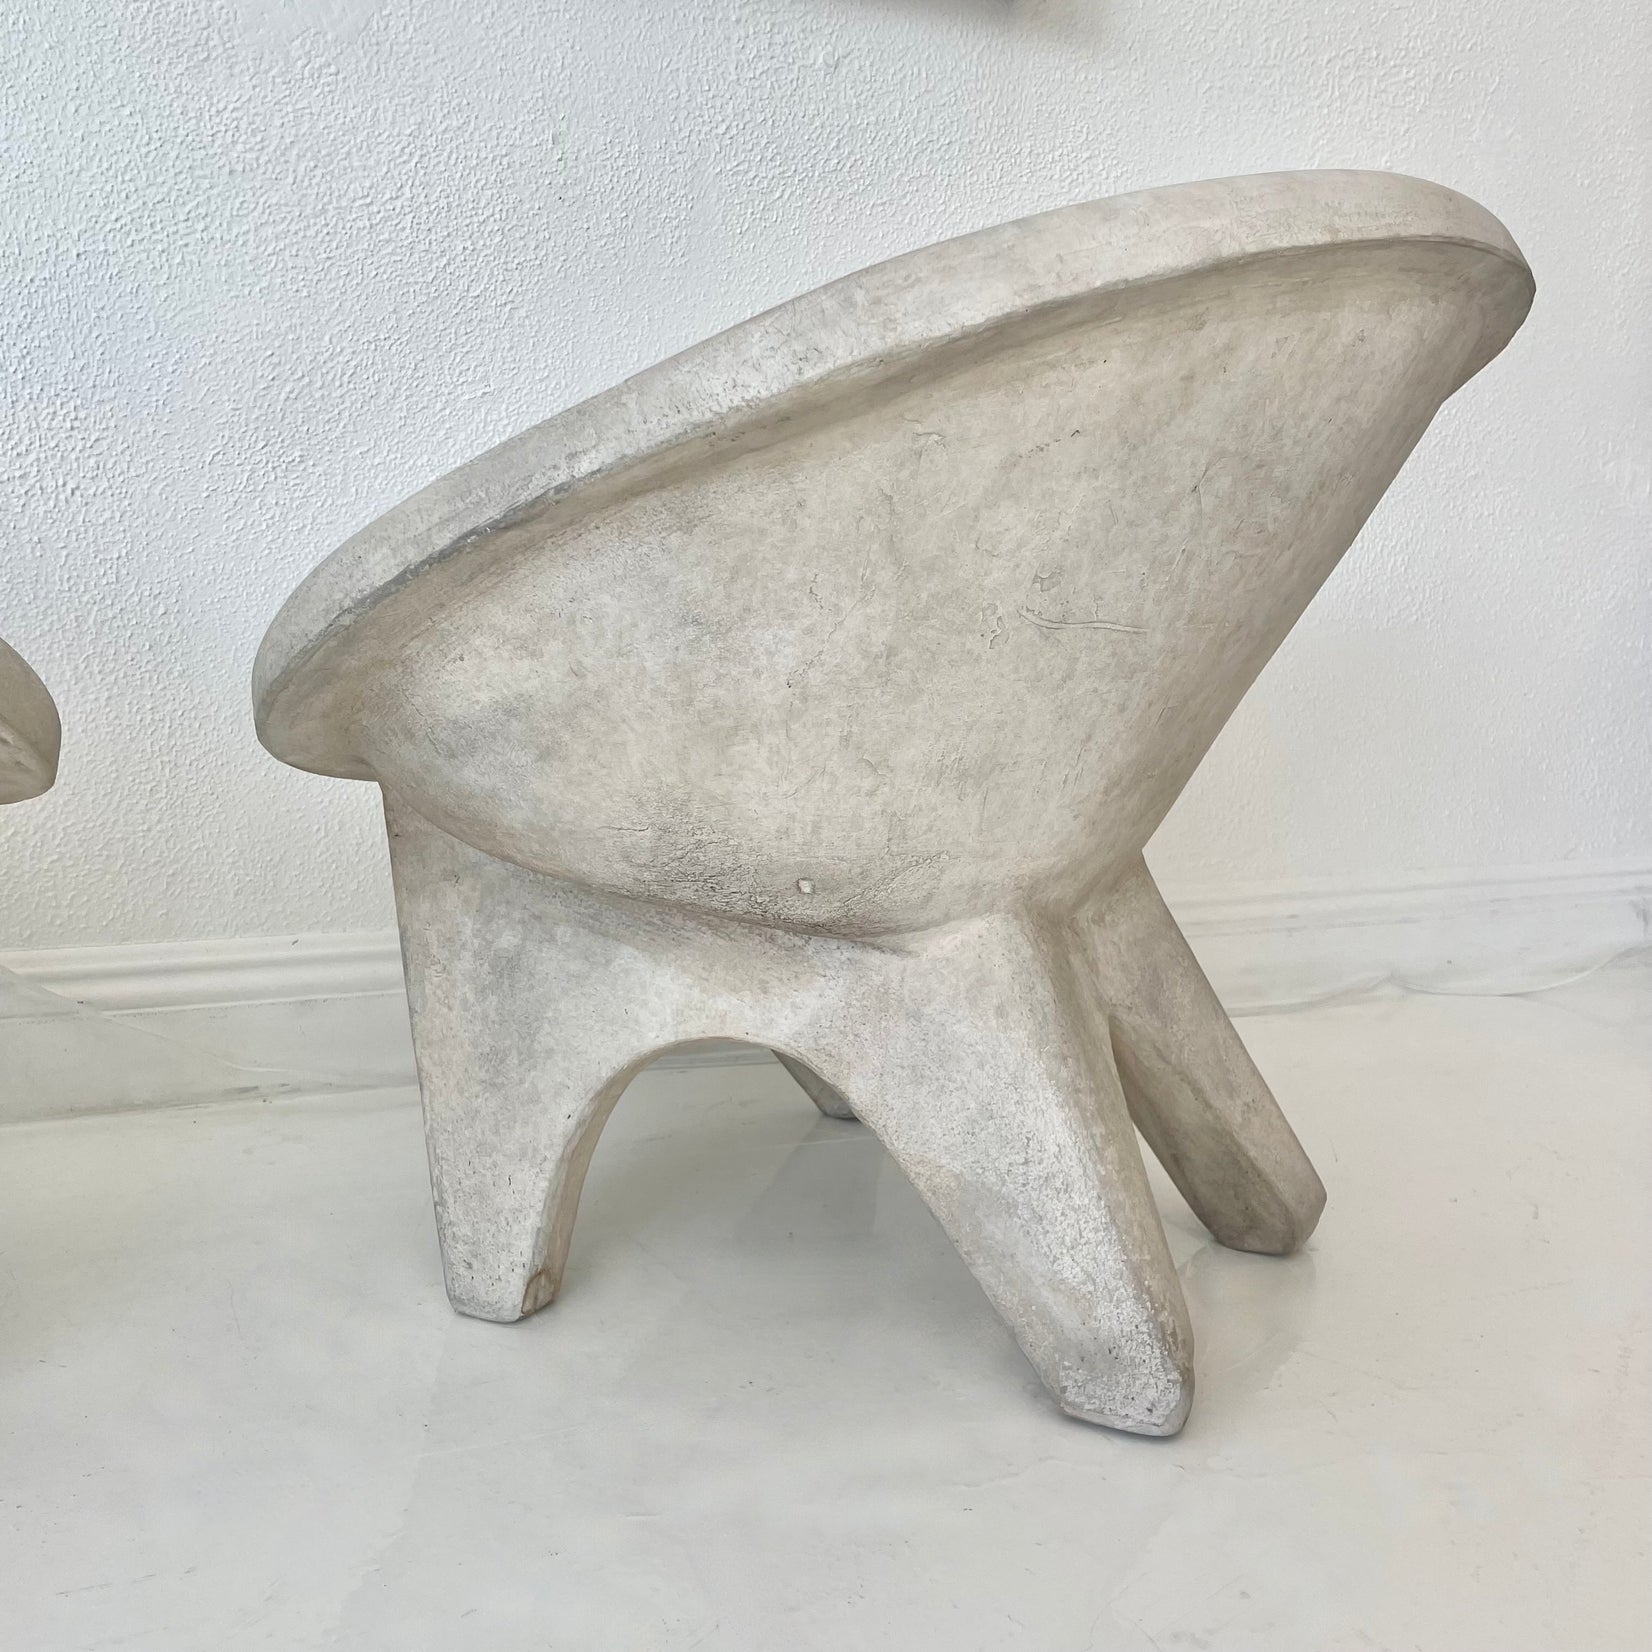 Pair of Sculptural Concrete Chairs